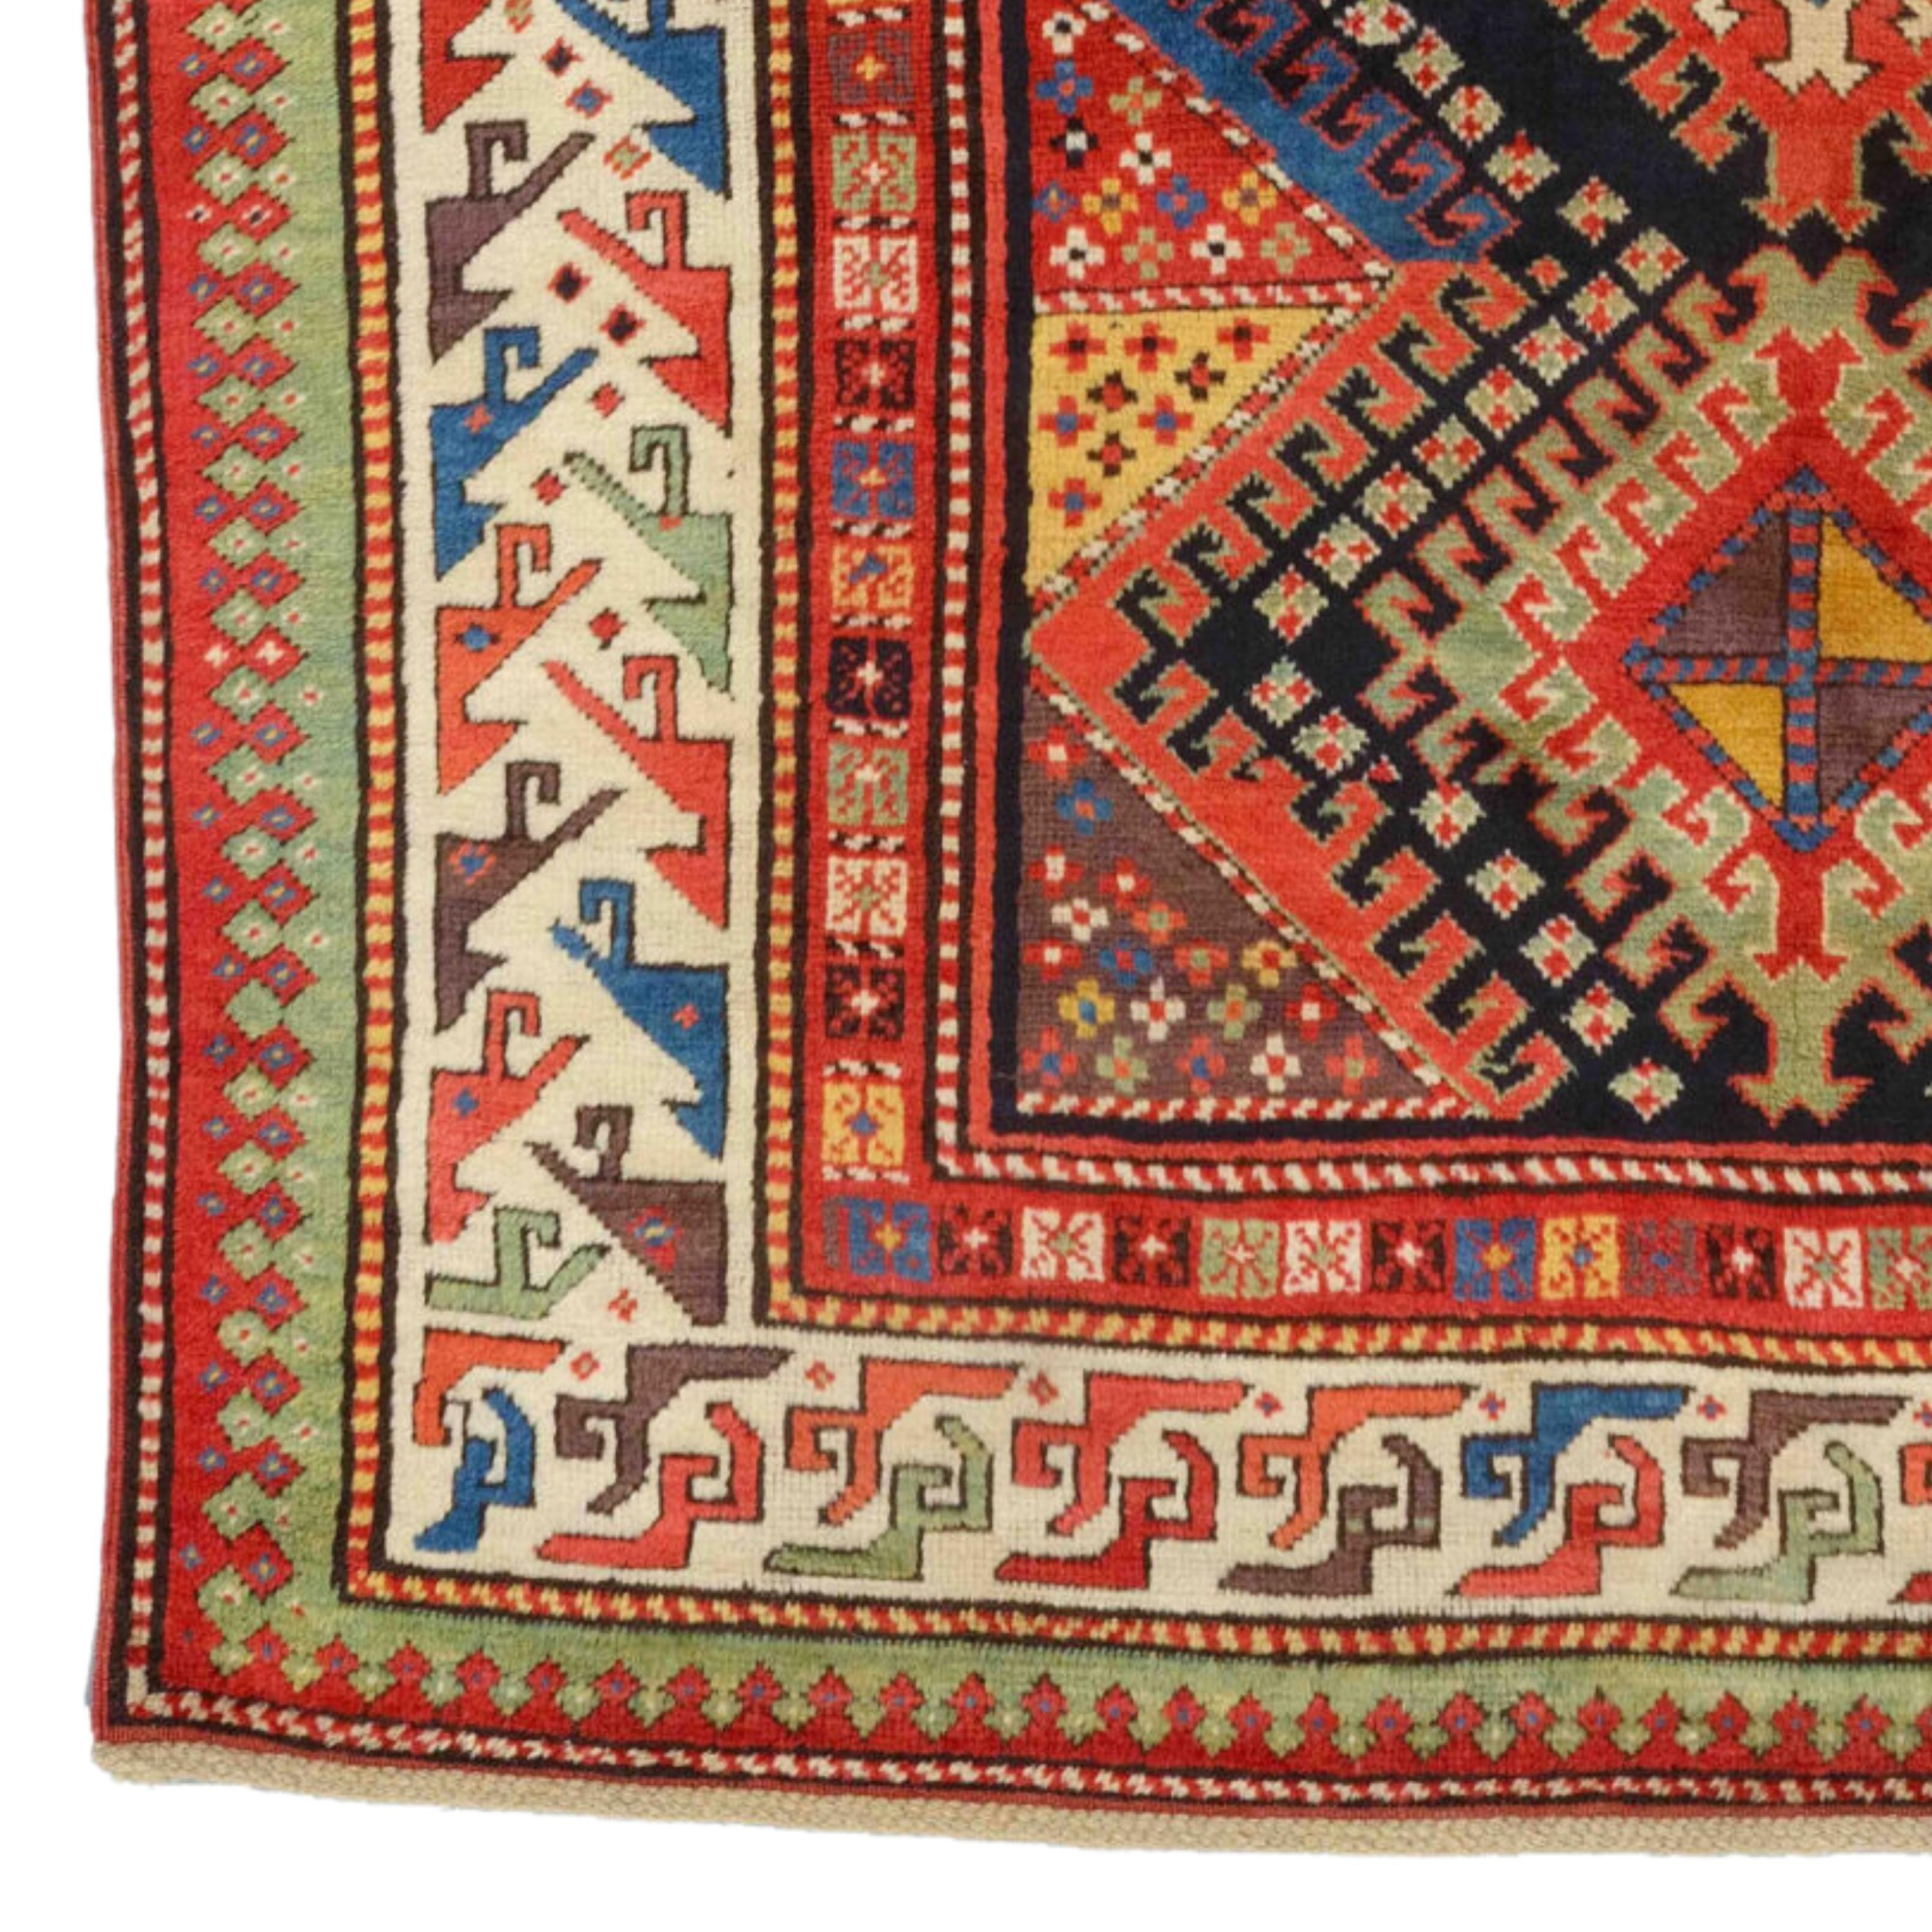 Antique Moghan Rug - Caucasian Rugs
Middle of 19th Century An Unusual Caucasian Moghan Rug Good condition, original finishes all around.
Size 137 x 237 cm (53,9x93,3 In)

The Caucasian Moghan Rug is an extraordinary and distinctive antique Oriental